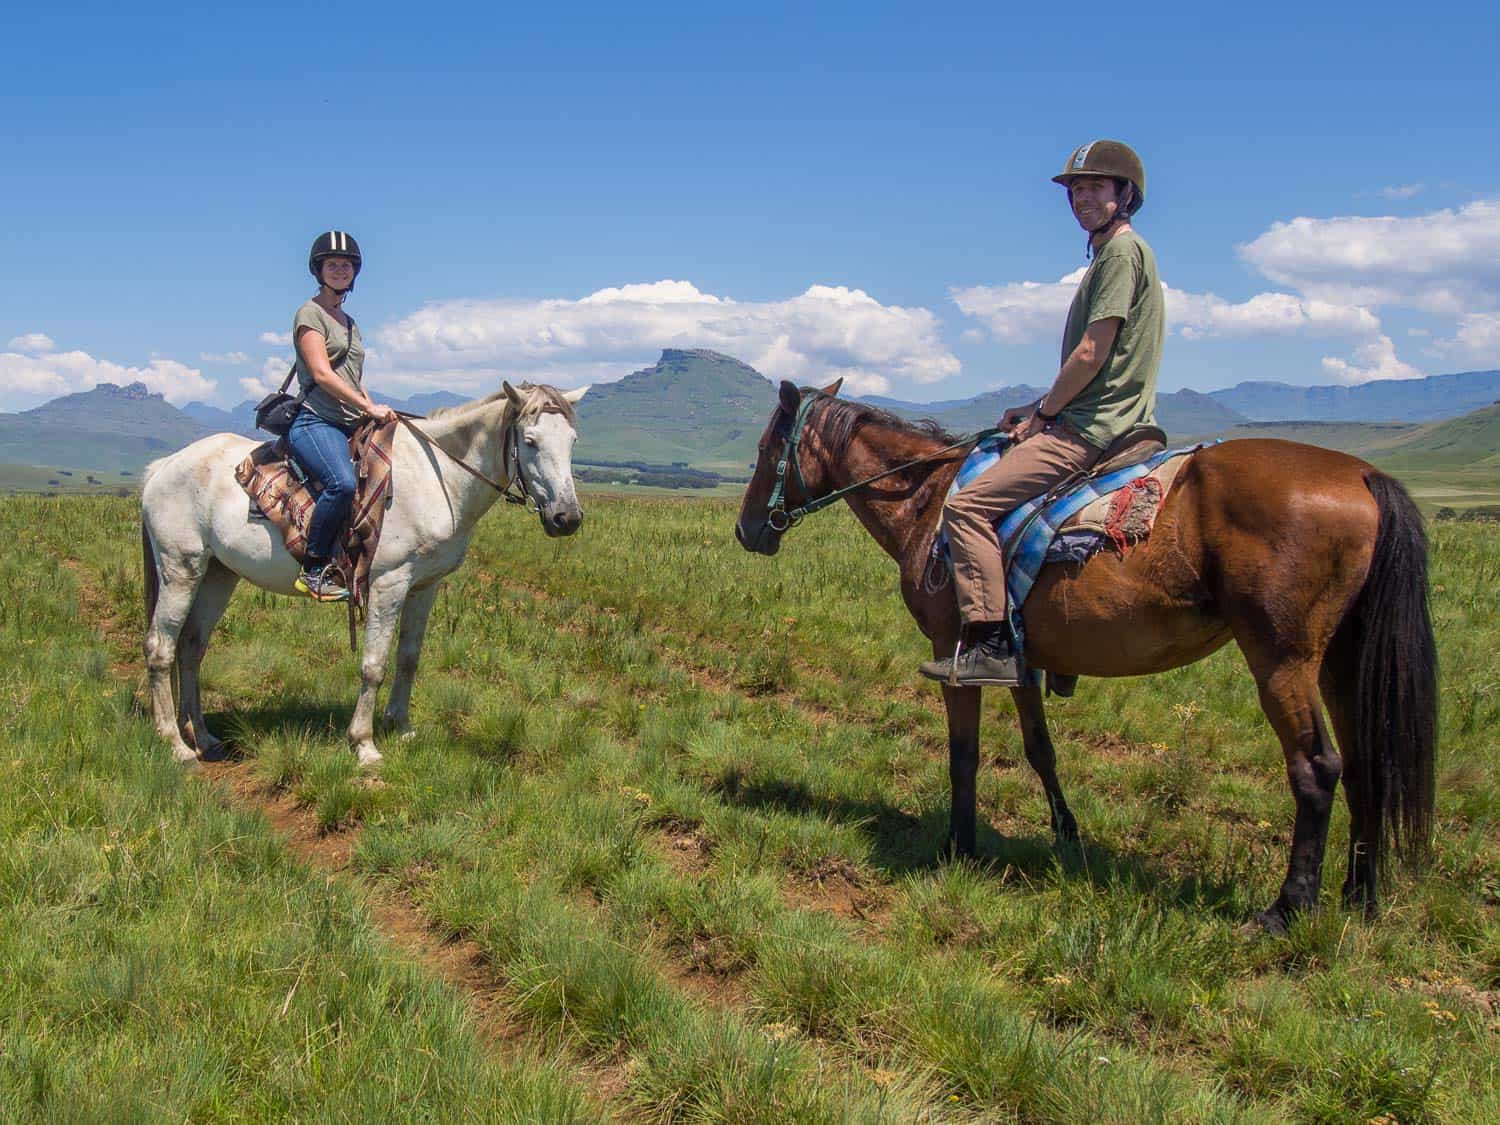 Horse riding with Khotso in Underberg in the Drakensberg Mountains